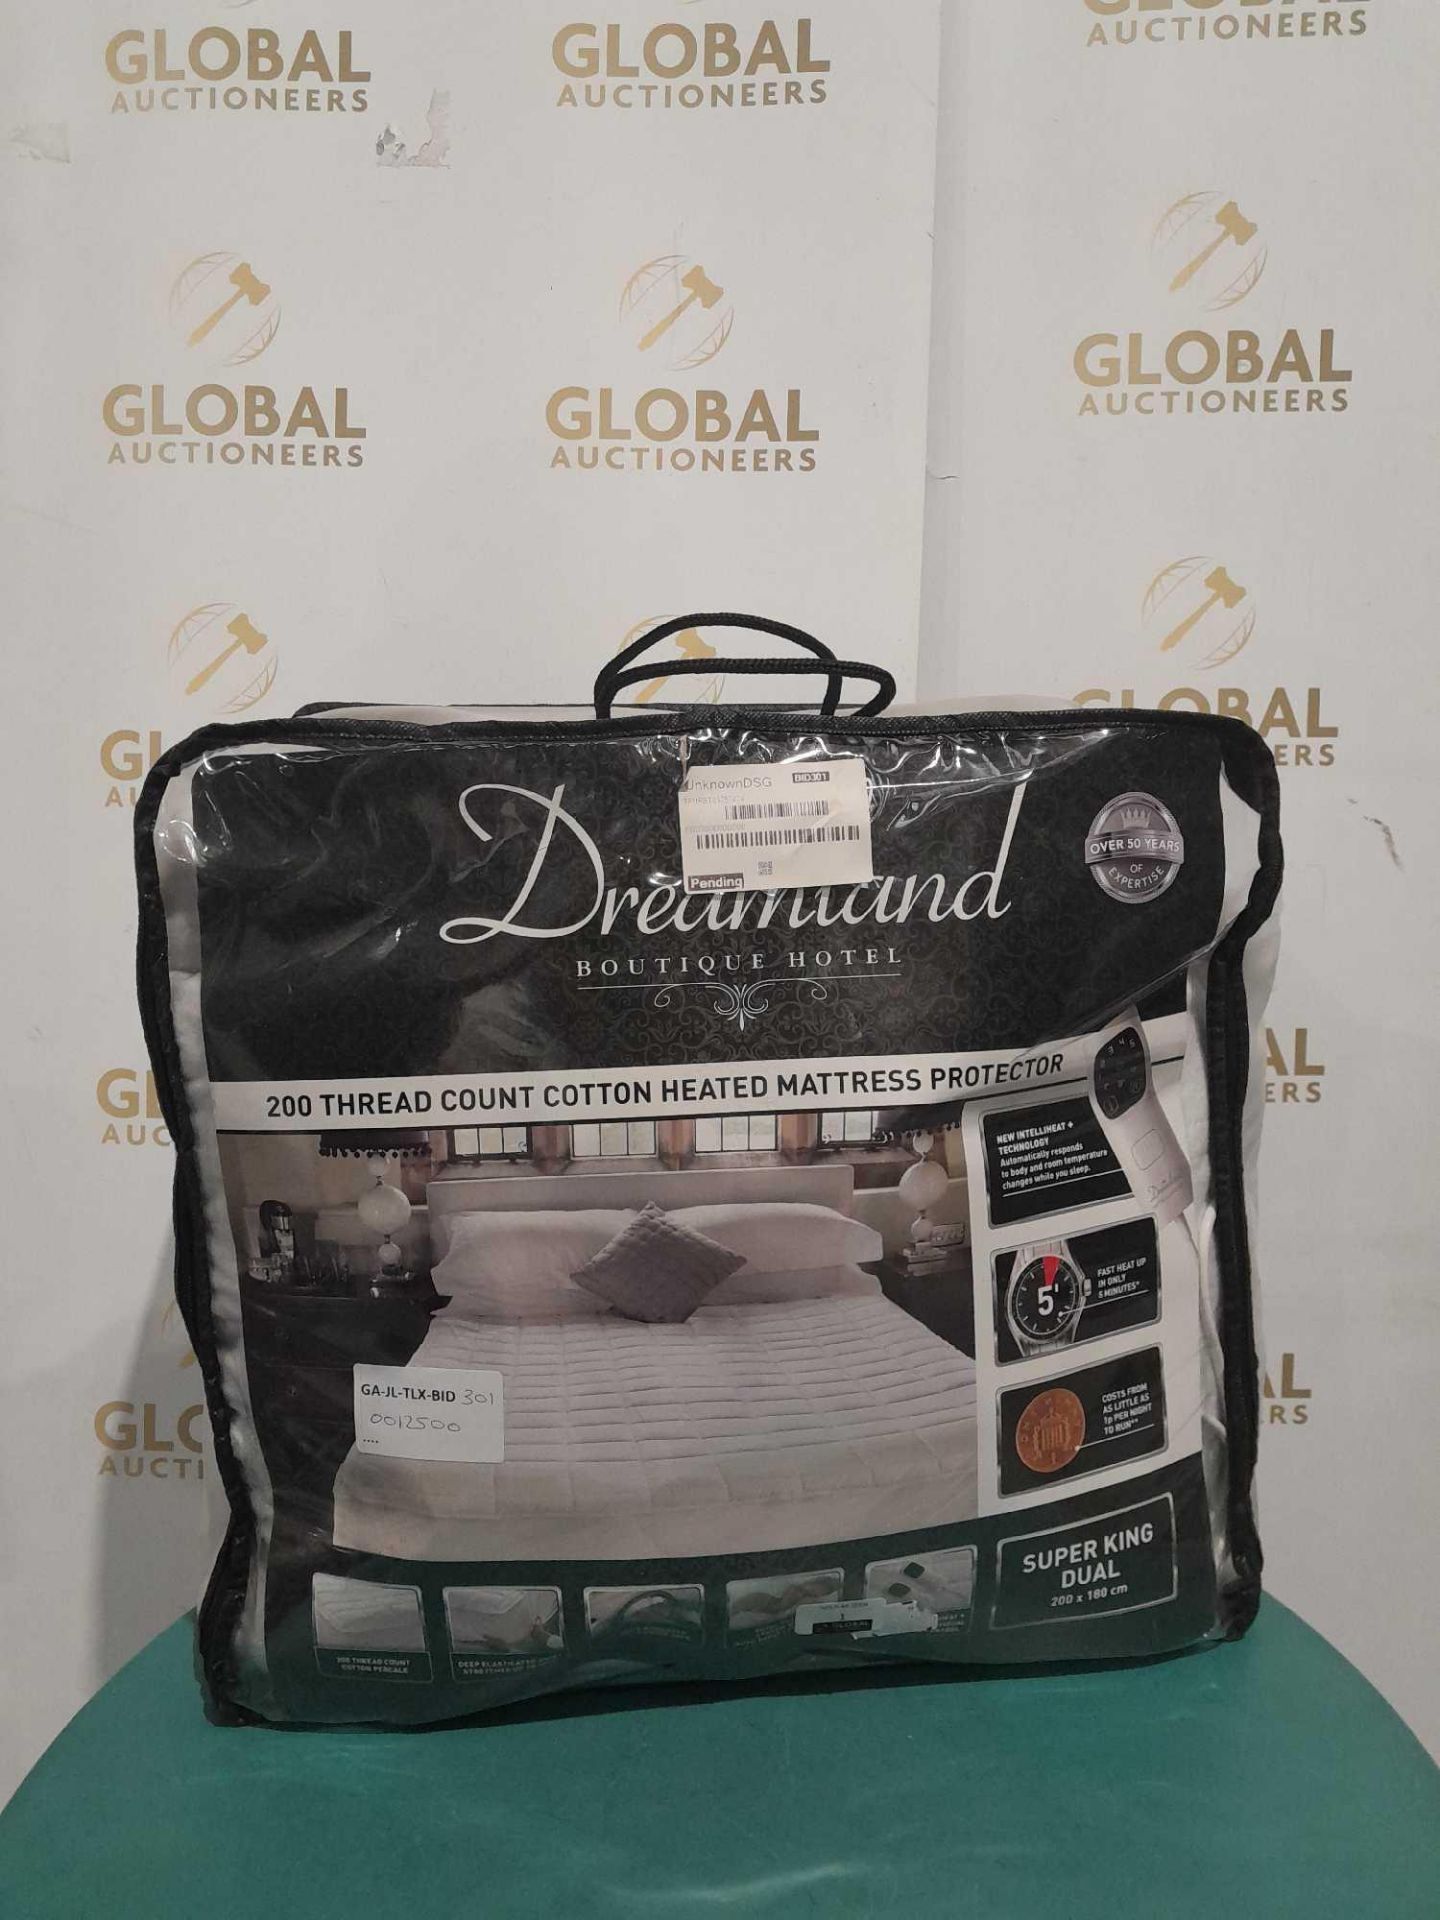 RRP £125 Bagged Dreamland Super King Dual 200X180Cm 200 Thread Count Cotton Heated Mattress Protecto - Image 2 of 2